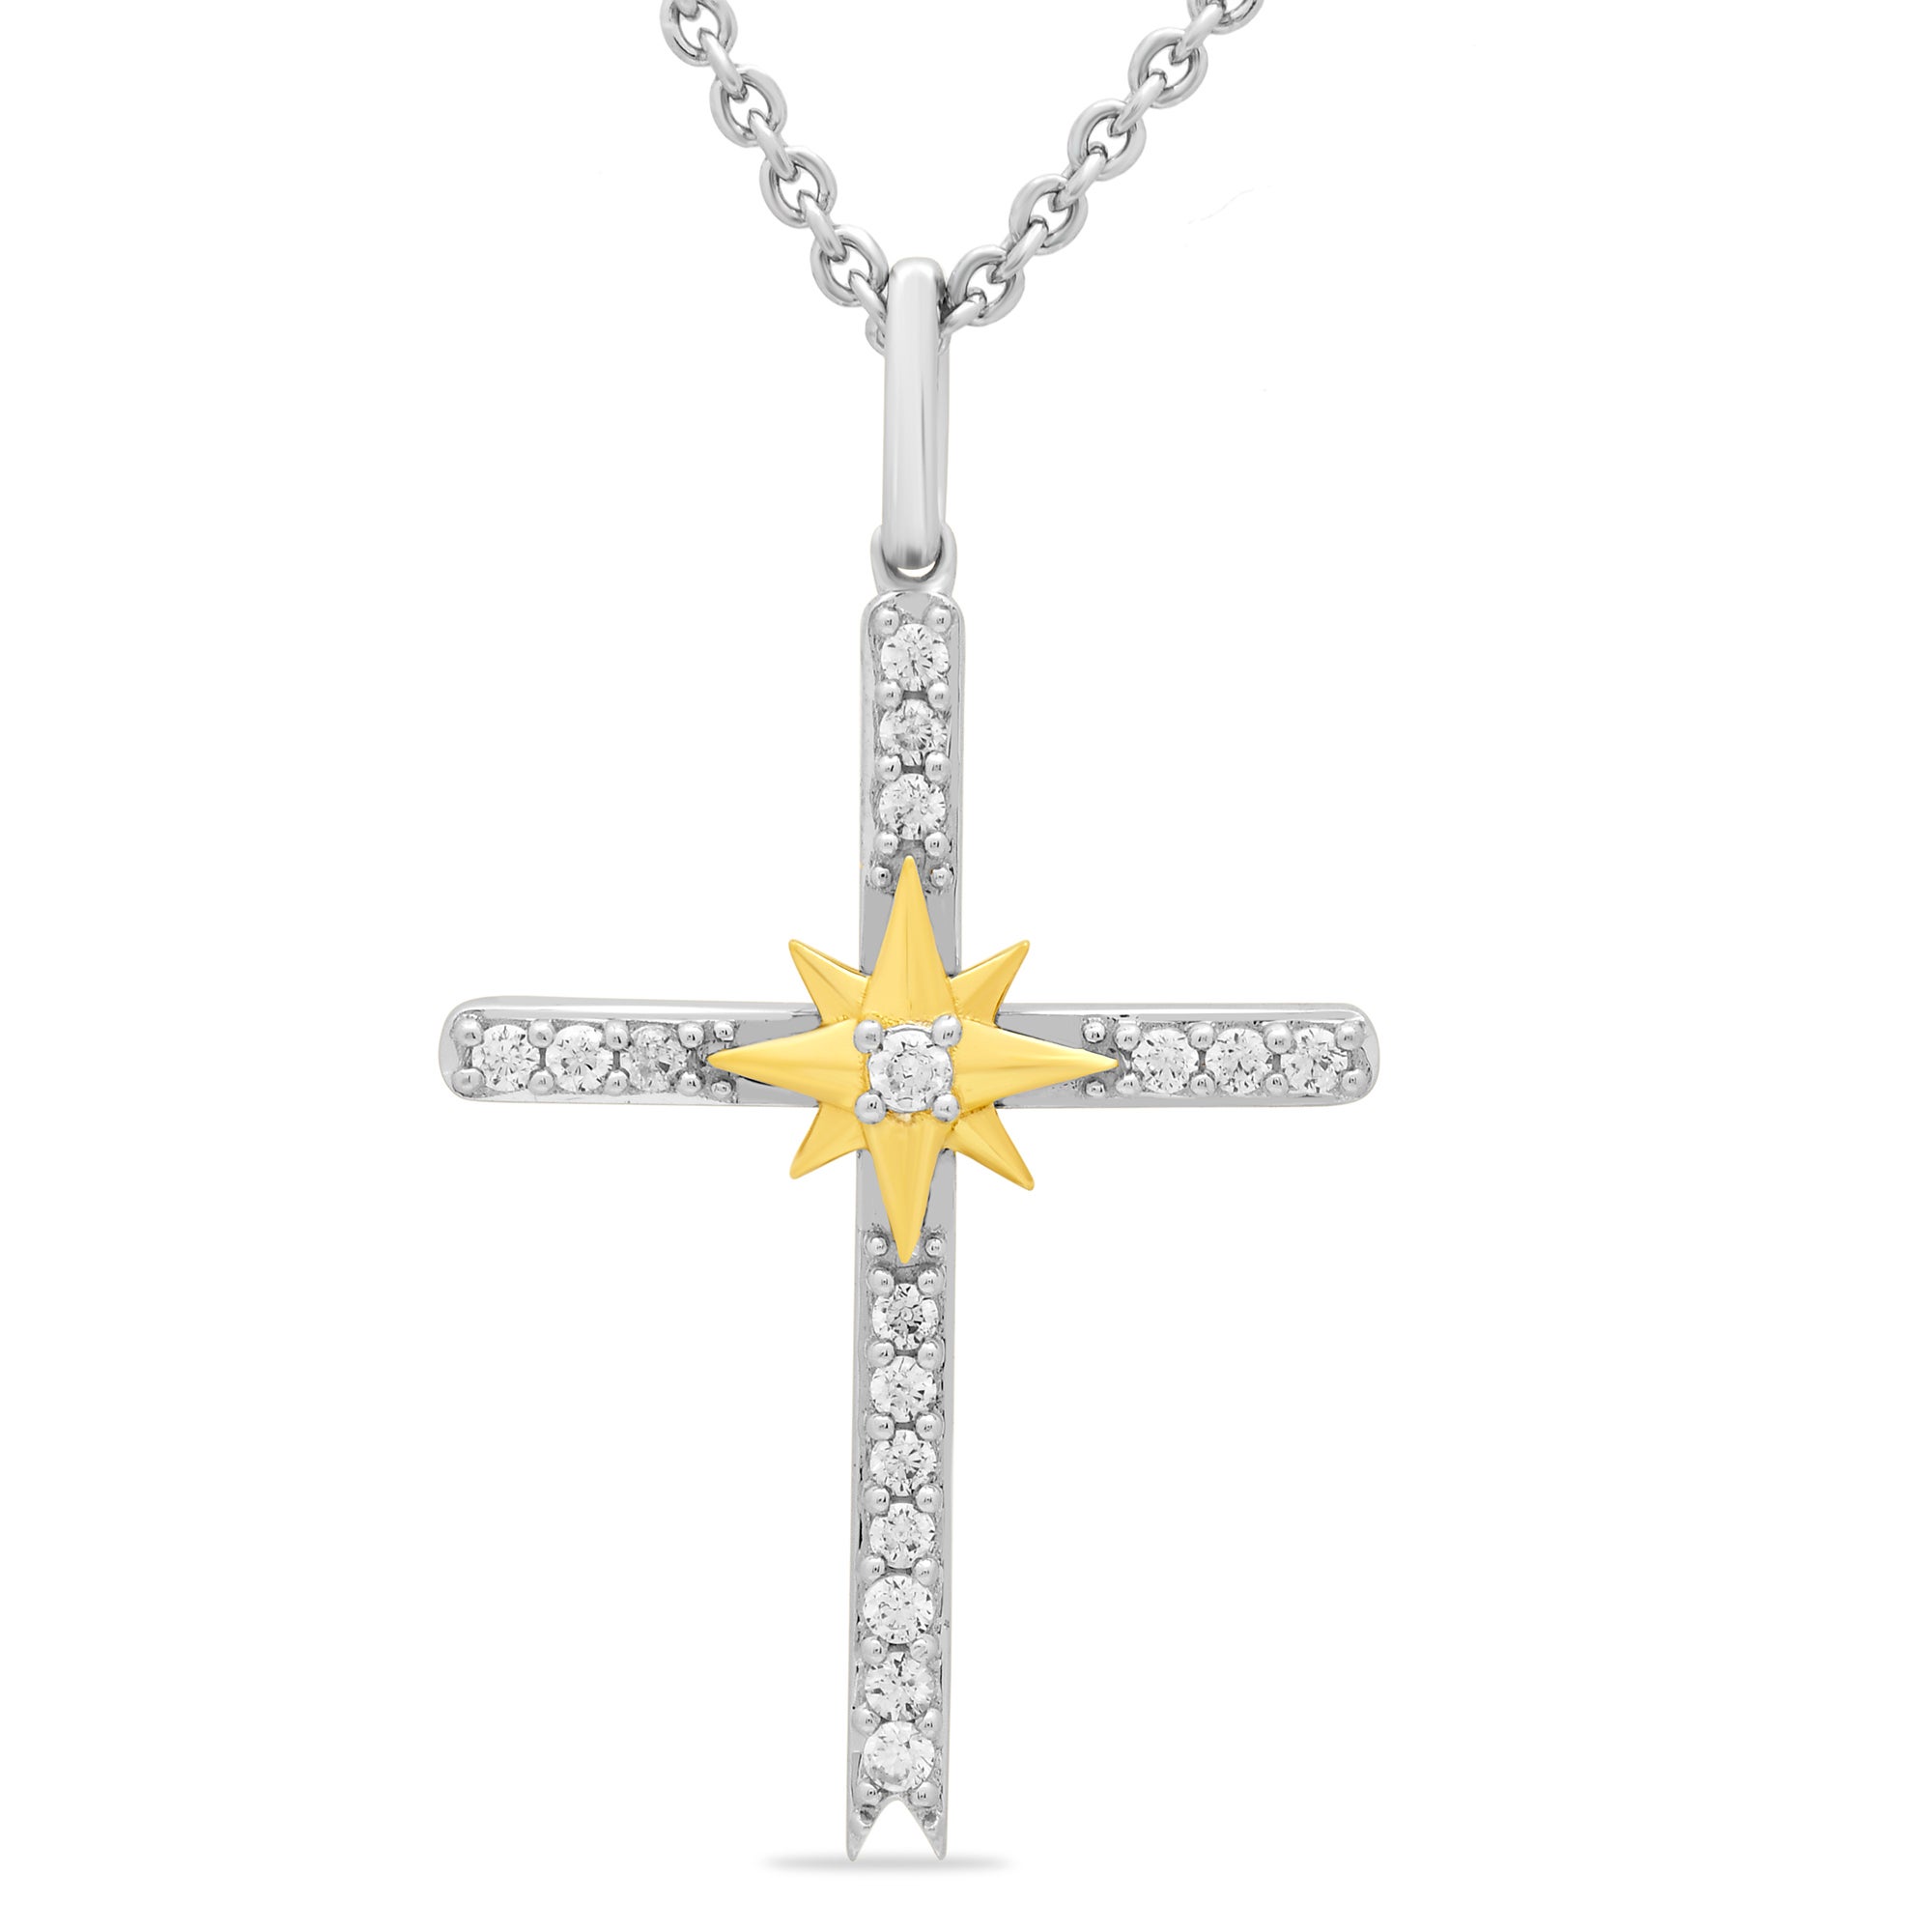 Hyde Park Collection Platinum & 18K White Gold Pearl, Diamond & Enamel  Station Necklace-54479 - Hyde Park Jewelers